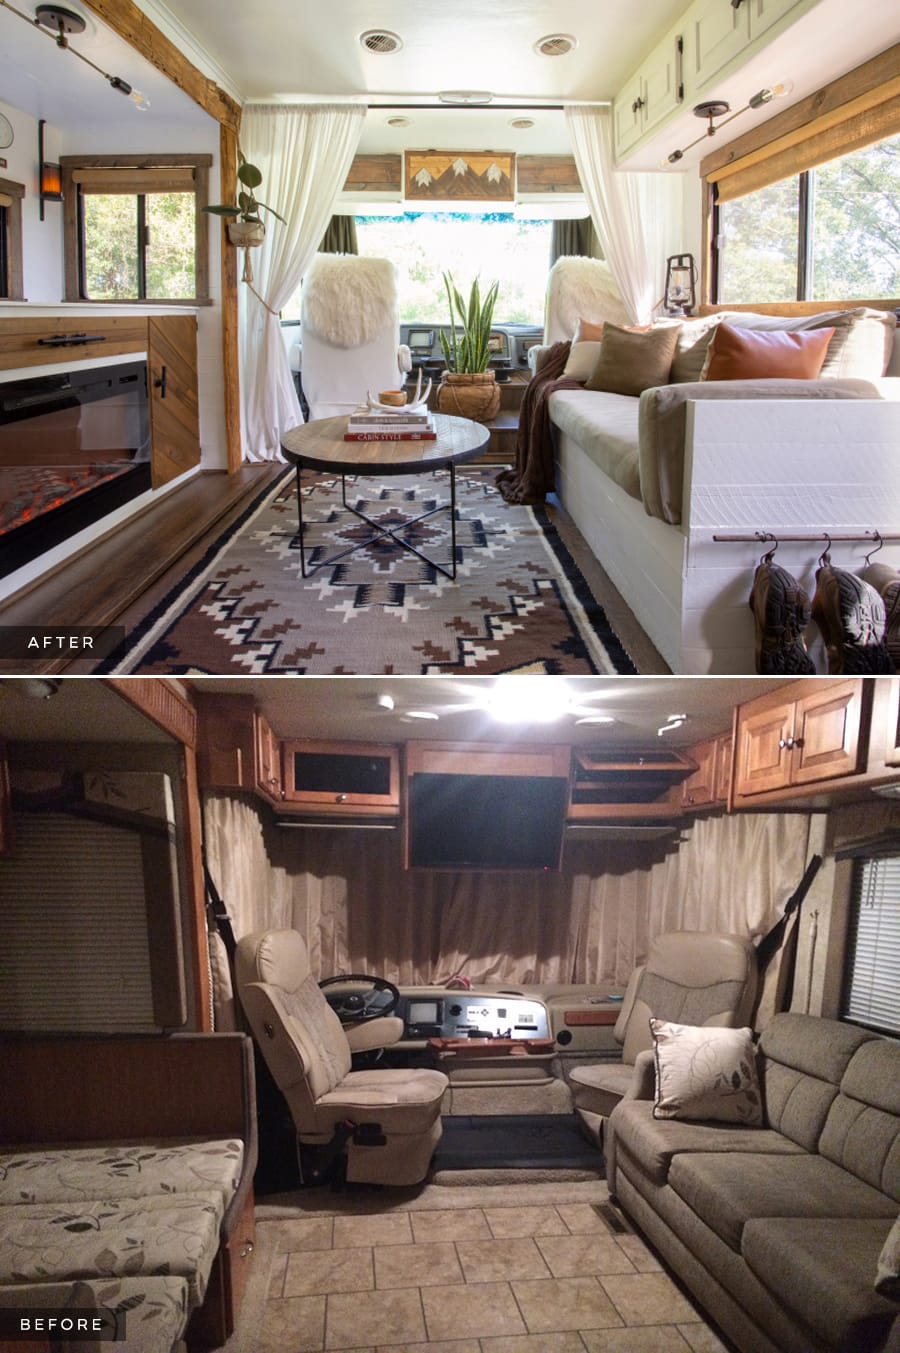 Our RV Renovation Photo Gallery